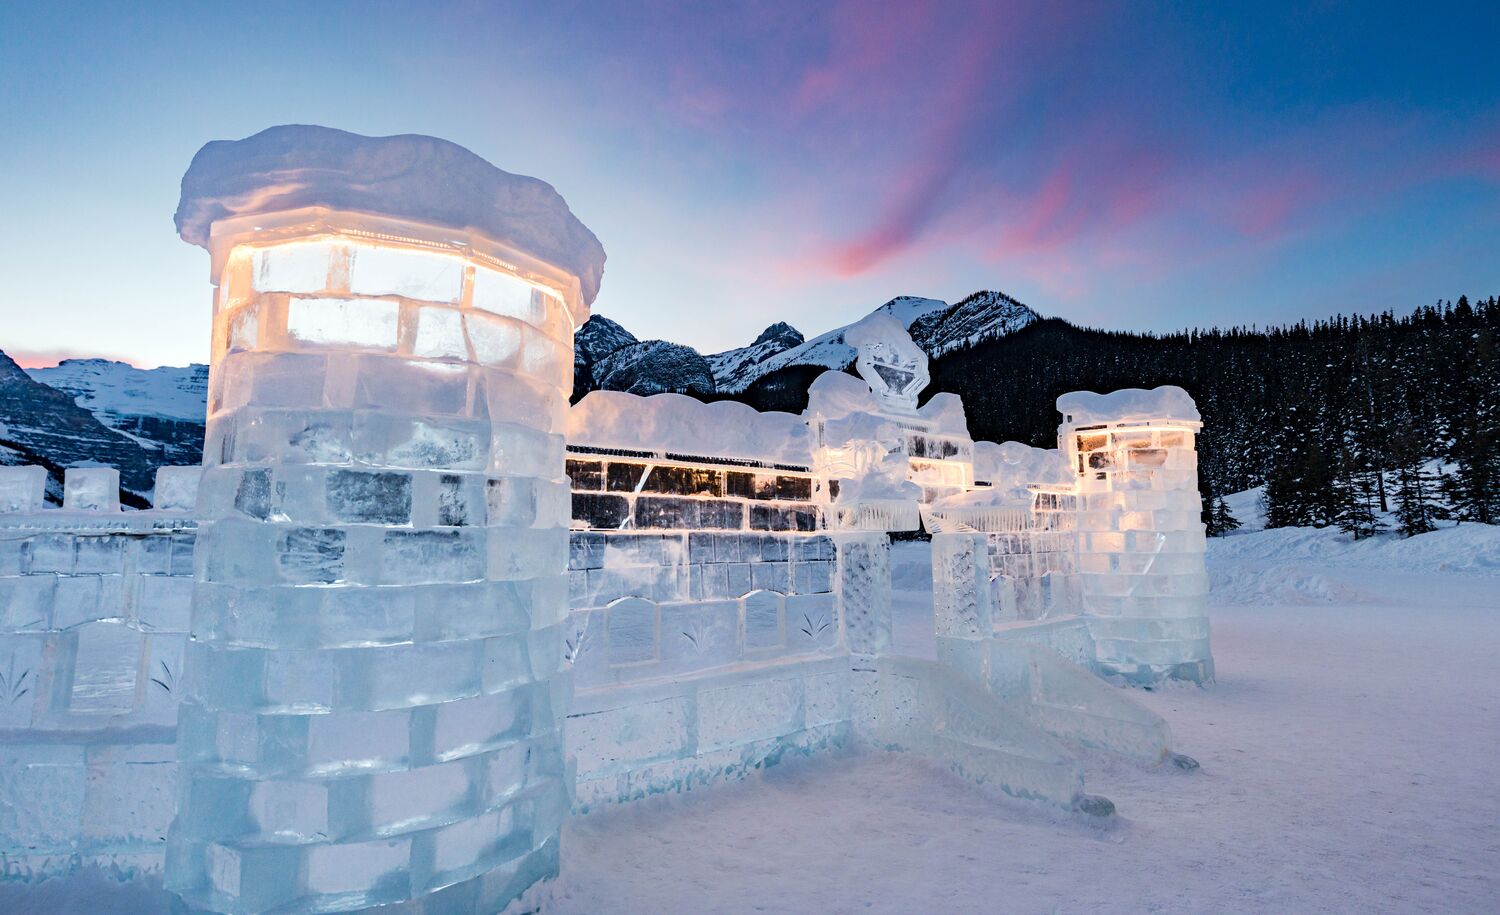 The Ice Castle at Lake Louise in Banff National Park.